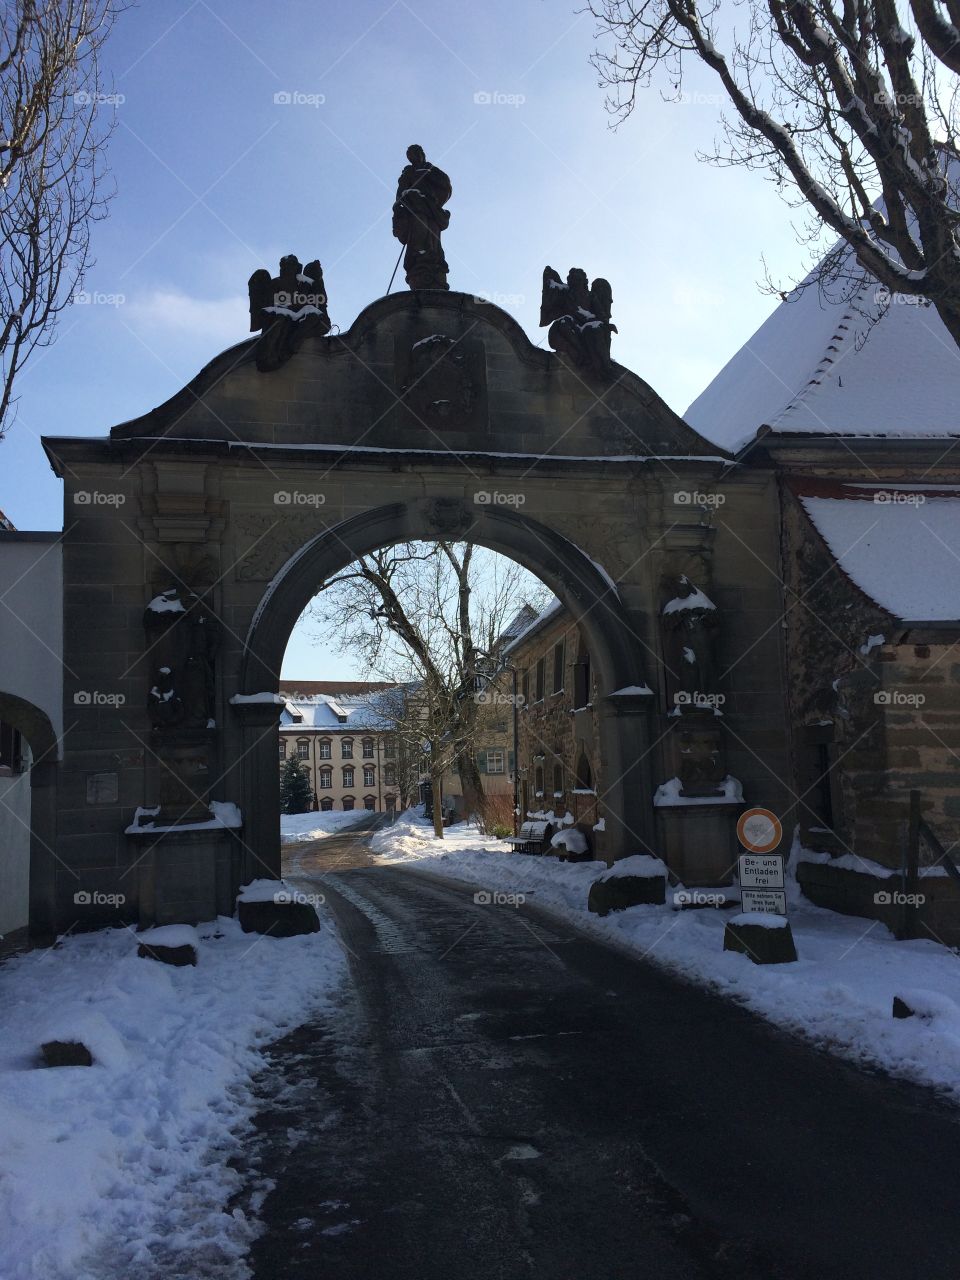 Gate at the monastery Kirchberg, Germany.